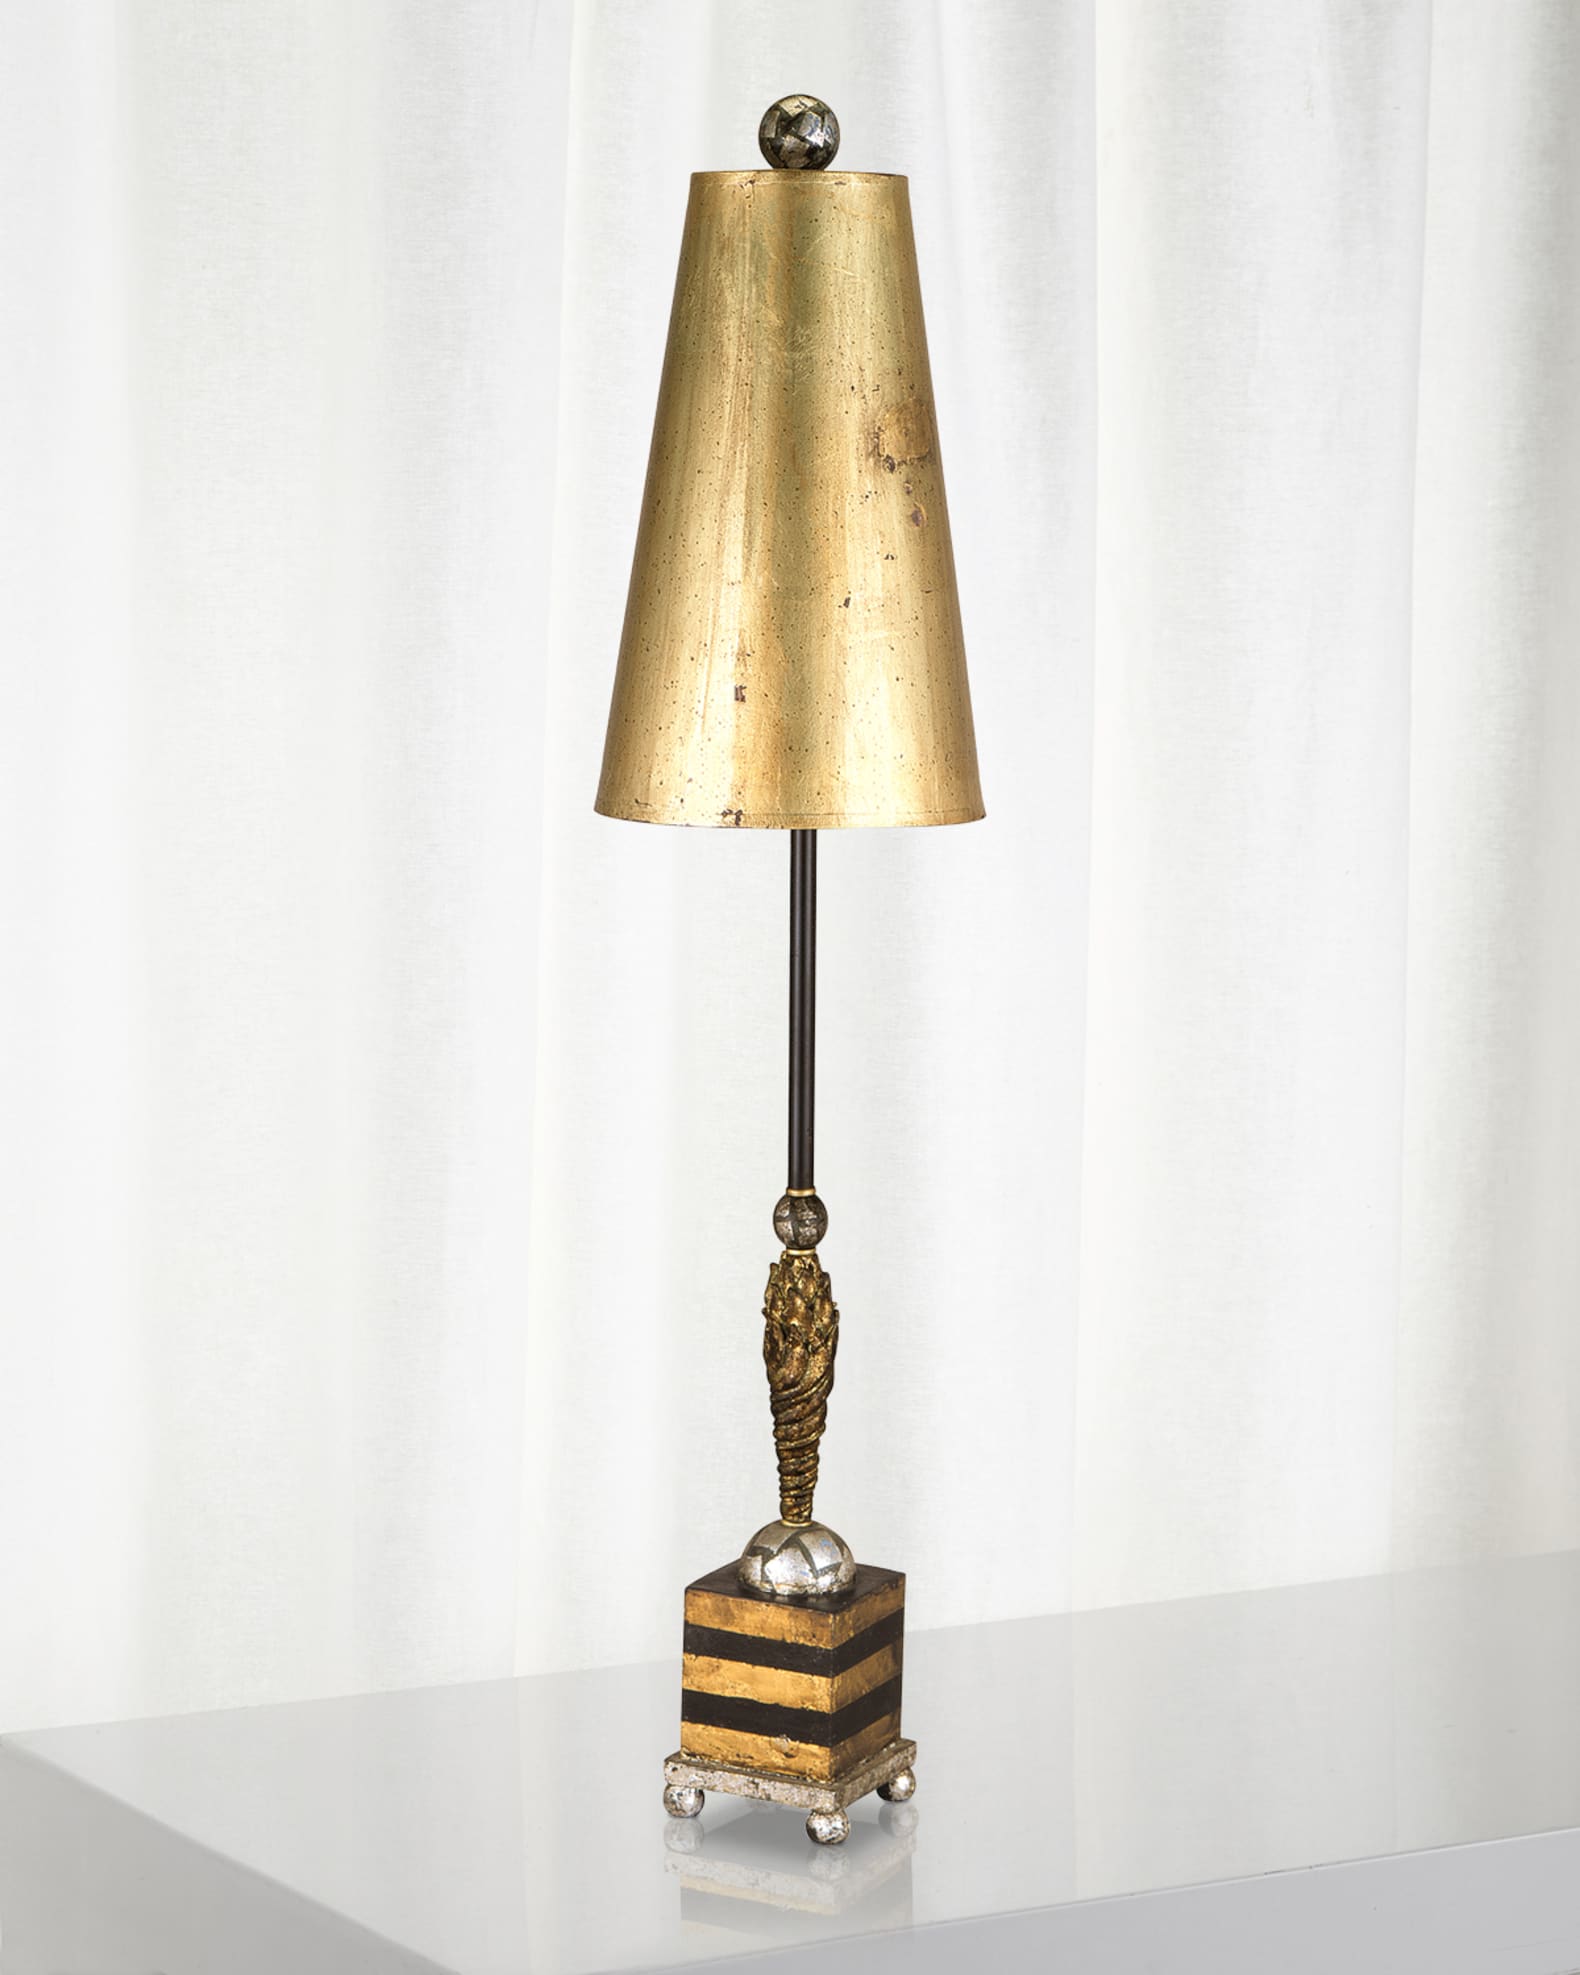 Lucas + McKearn Noma Luxe Table Lamp